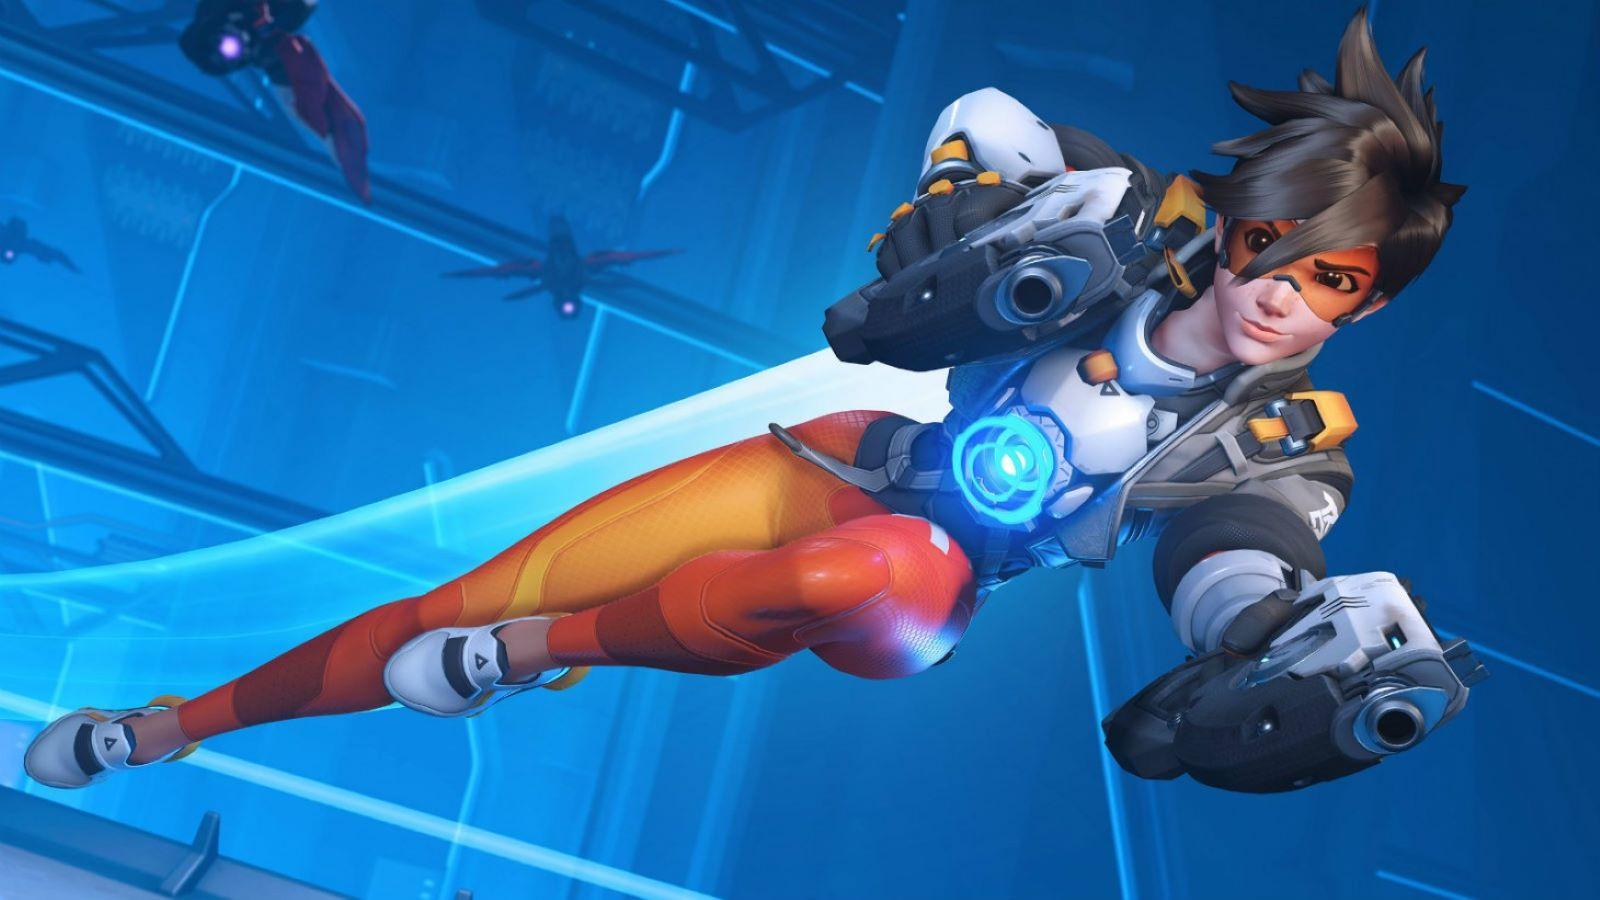 5 Overwatch 2 heroes to duo with Tracer